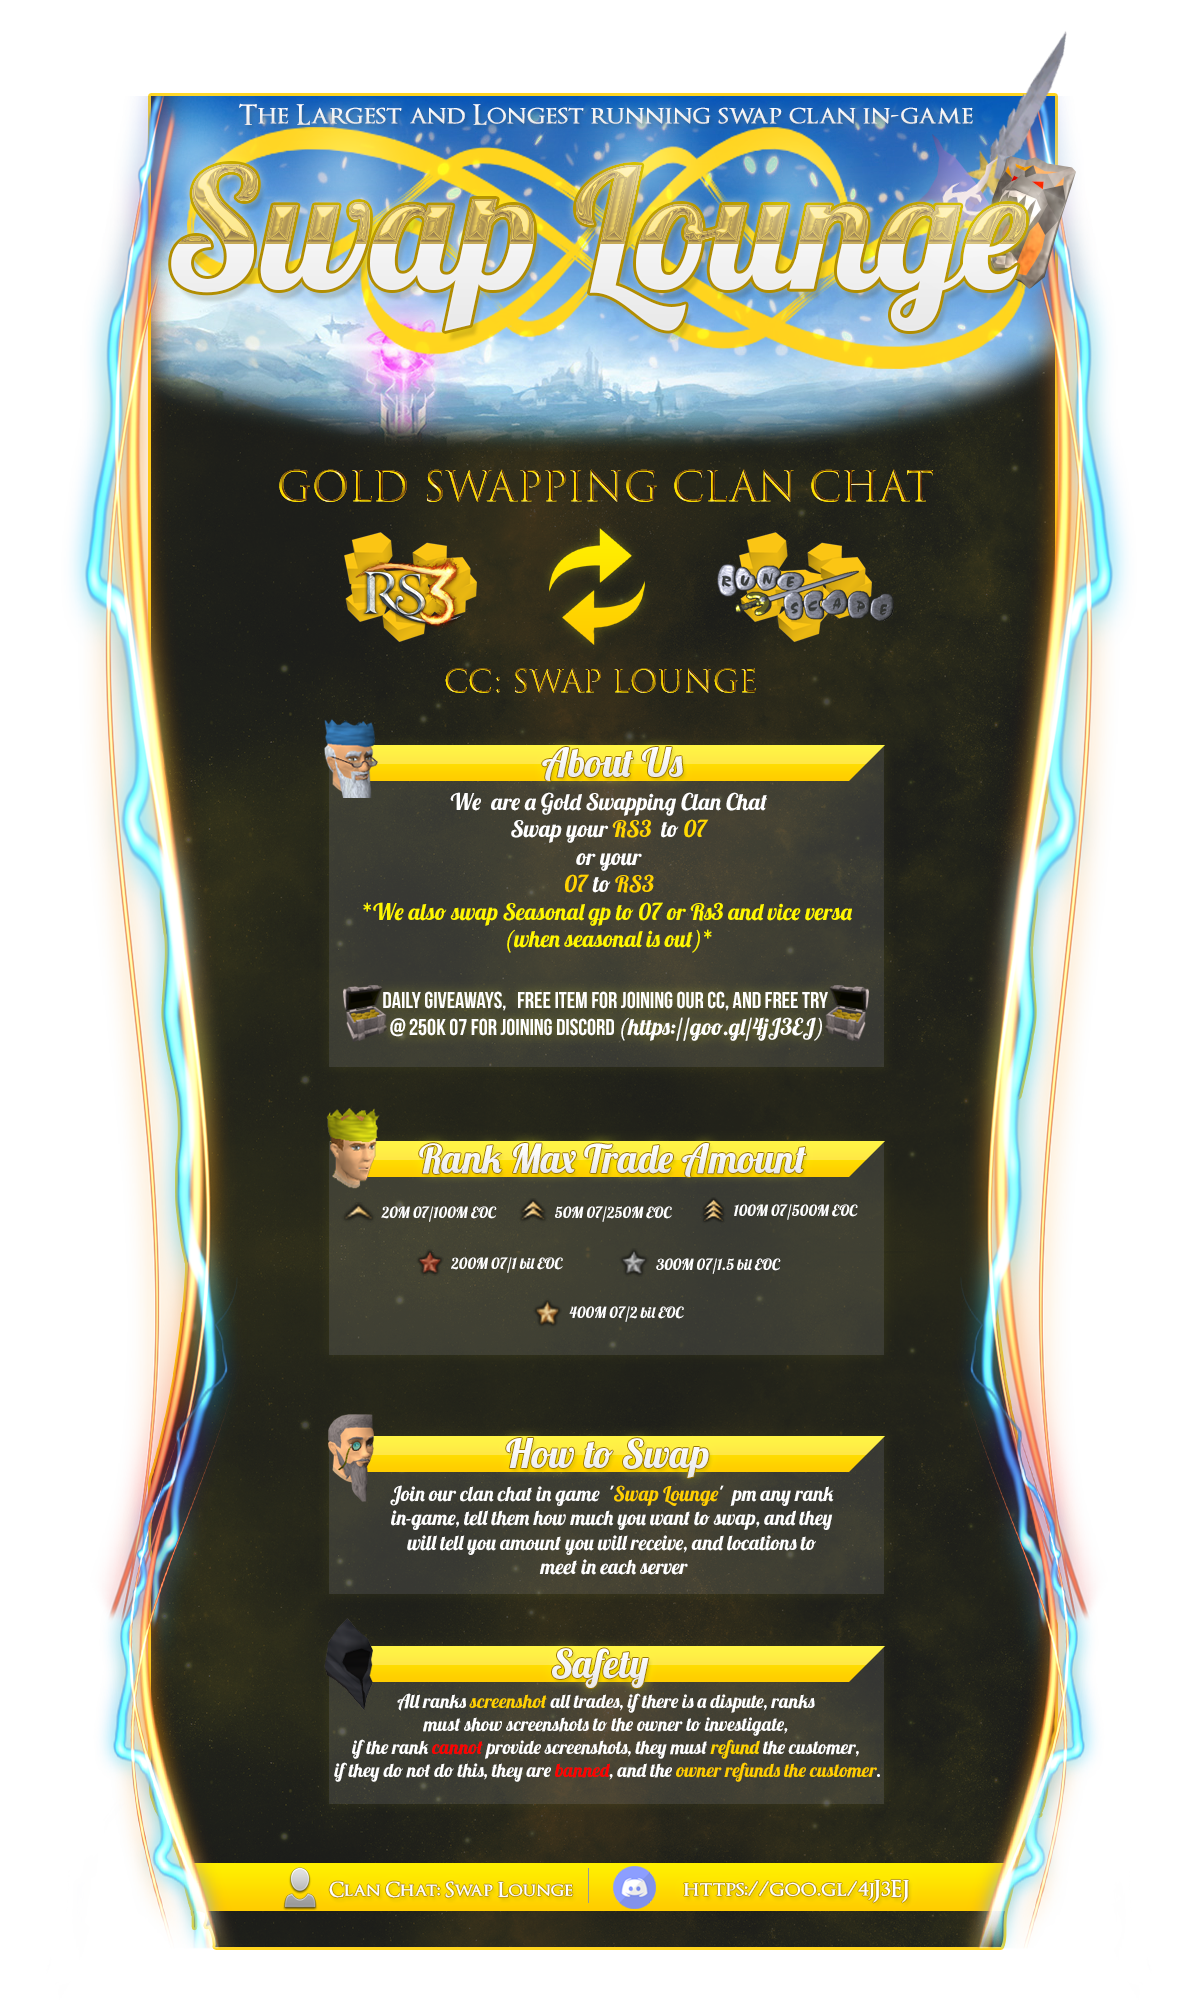 Swap Lounge Clan Chat Swapping Rs3 07 Tourney Sell Trade Game Items Osrs Gold Elo